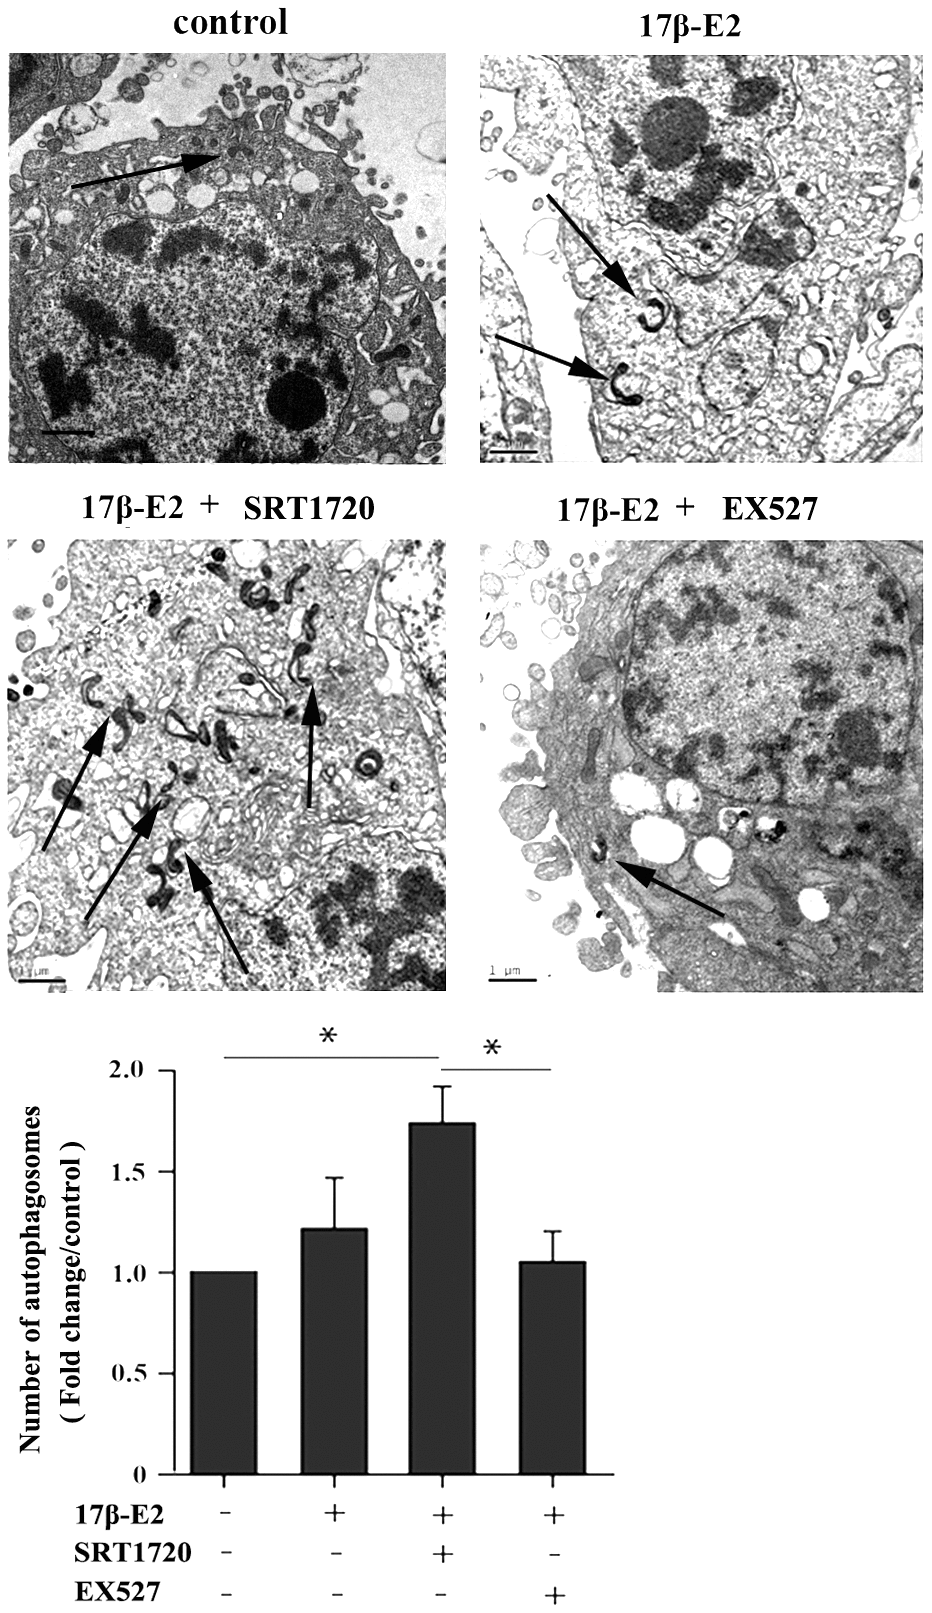 Effect of SIRT1 up-regulation induced by 17β-E2 on cell autophagy in hFOB1.19 osteoblasts. TEM images showed more double-membrane vacuoles (autophagosomes) in cells treated with 17β-E2 + SRT1720 compared with those in the control group and 17β-E2 + EX527 group. The histogram showed the number of autophagosomes in different groups as indicated. The autophagic vacuoles are indicated with black arrows. Black bar: 1 μm. * P 